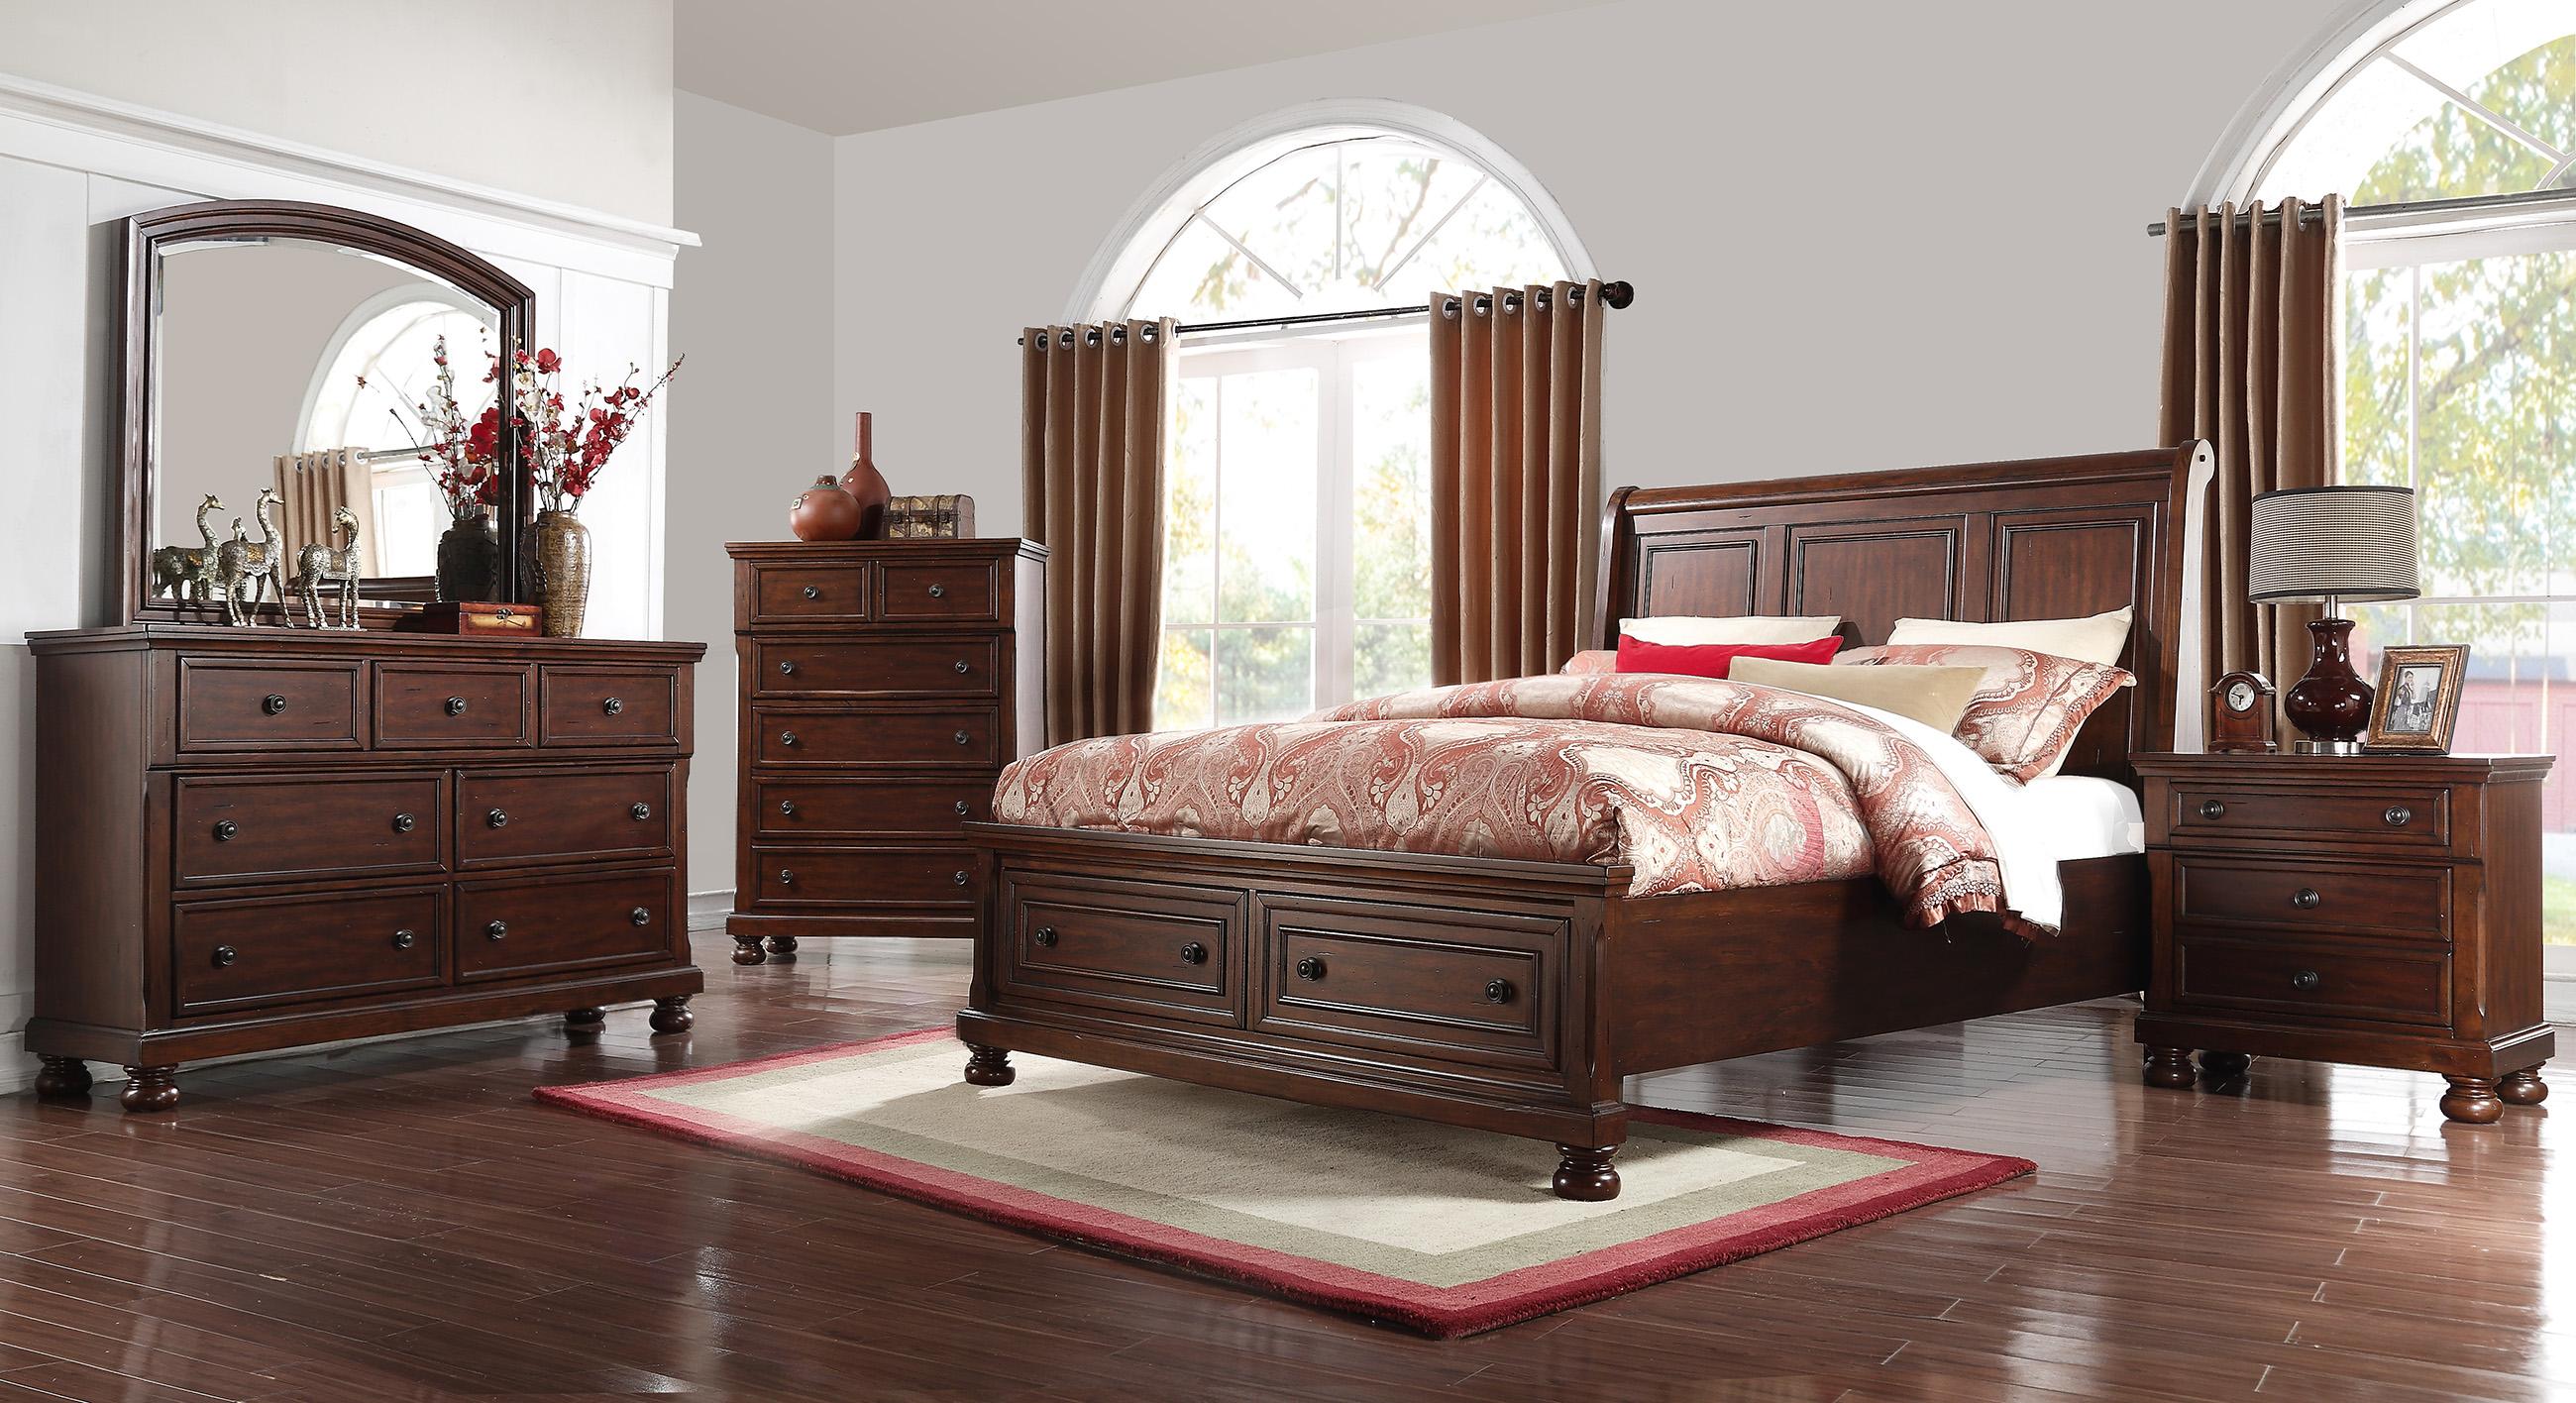 Traditional, Transitional Storage Bedroom Set PRESCOTT 1041-3Pcs 1041-2N-3PC in Brown 